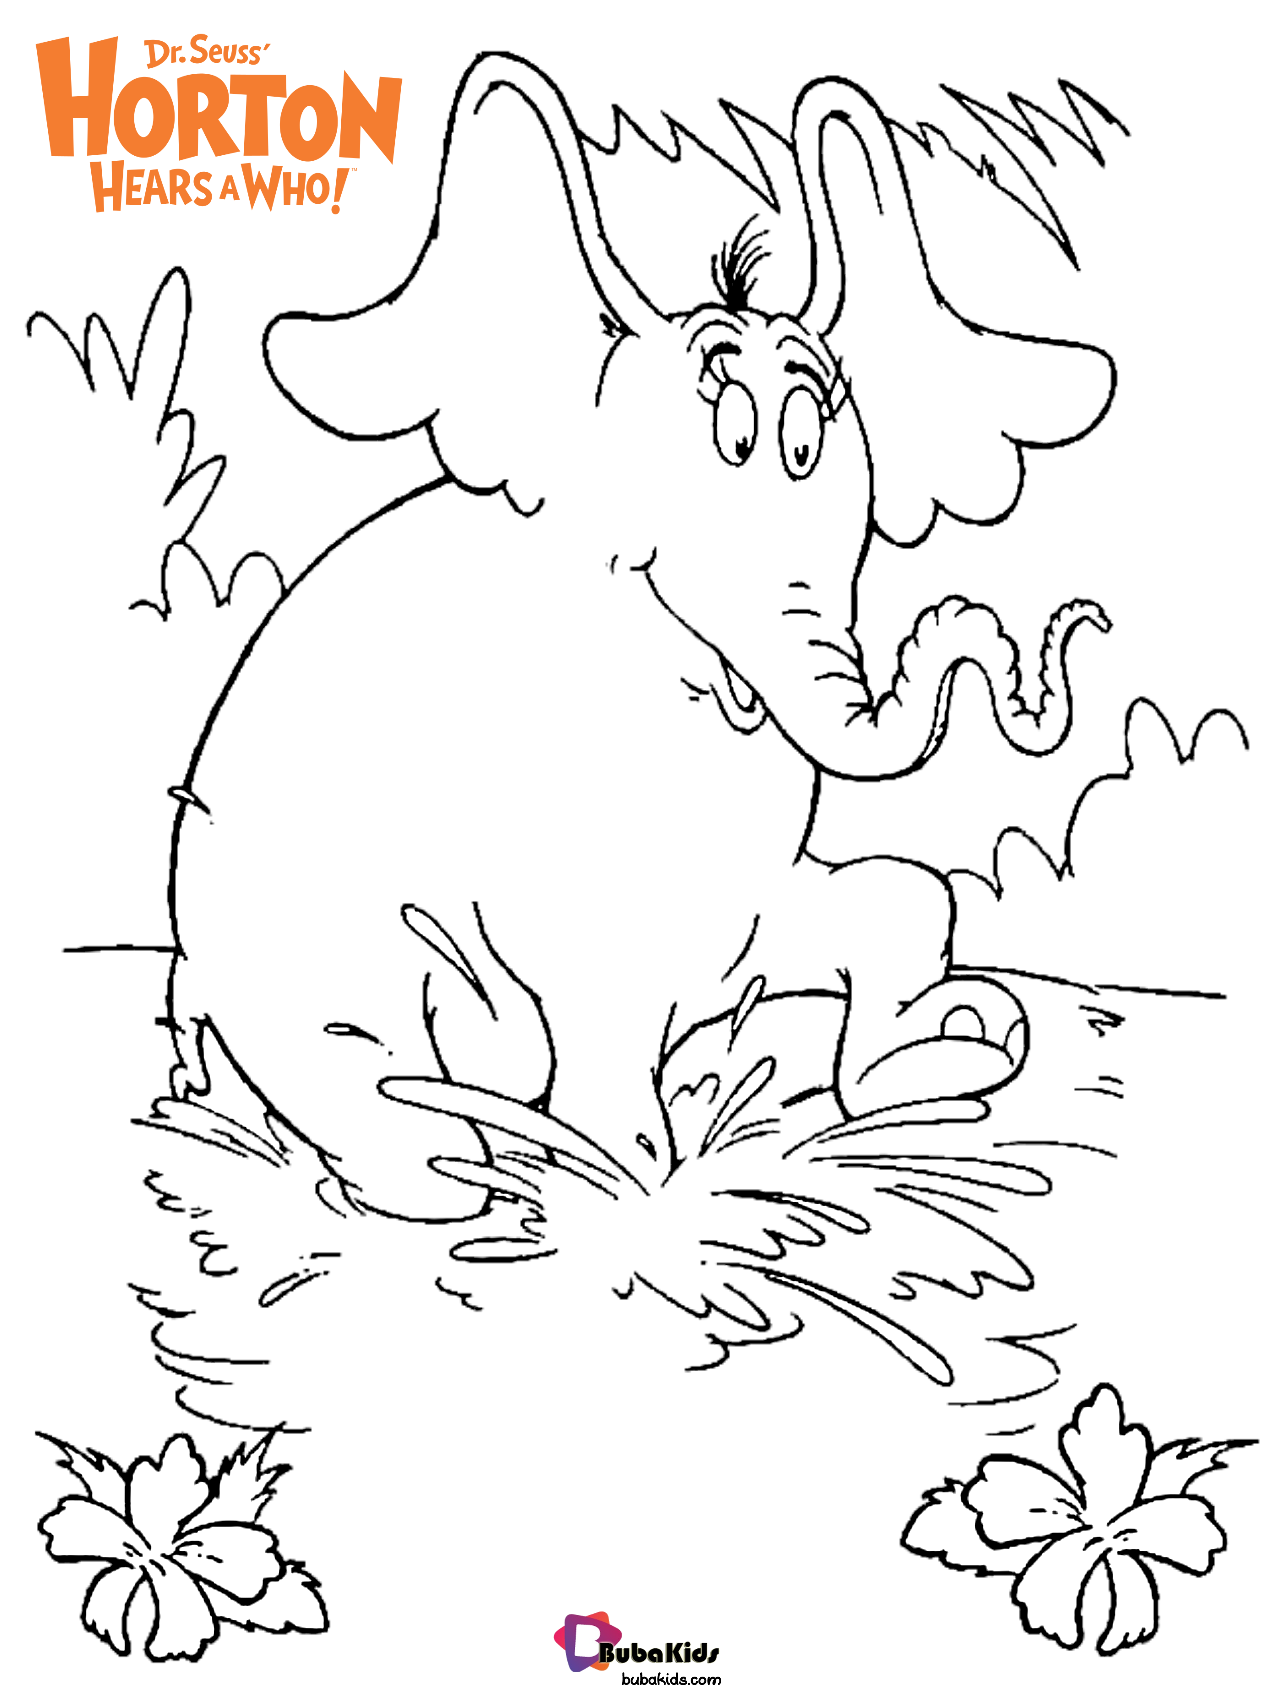 Horton hears a who coloring page dr seuss coloring Wallpaper